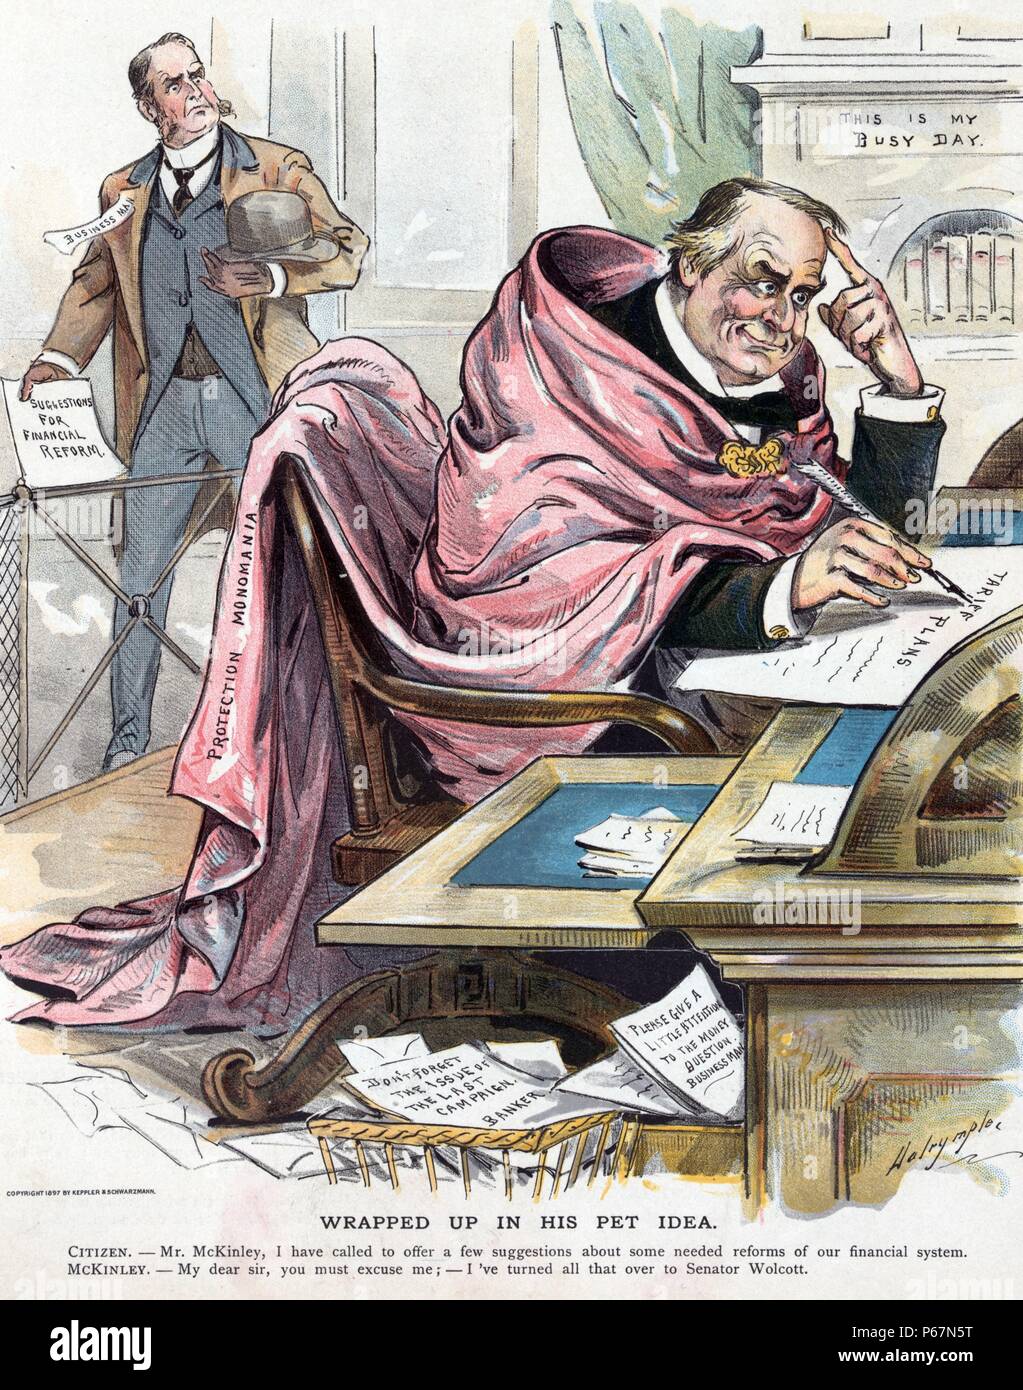 Wrapped up in his pet idea' President McKinley wearing a long cape labelled 'Protection Monomania', sitting at a desk working on his 'Tariff Plans', while ignoring a businessman who offers 'Suggestions for Financial Reform'; in baskets beneath the desk are papers that state 'Don't forget the issues of the last campaign. [signed] A Banker' and 'Please give a little attention to the money question. [signed] Businessman'. Stock Photo